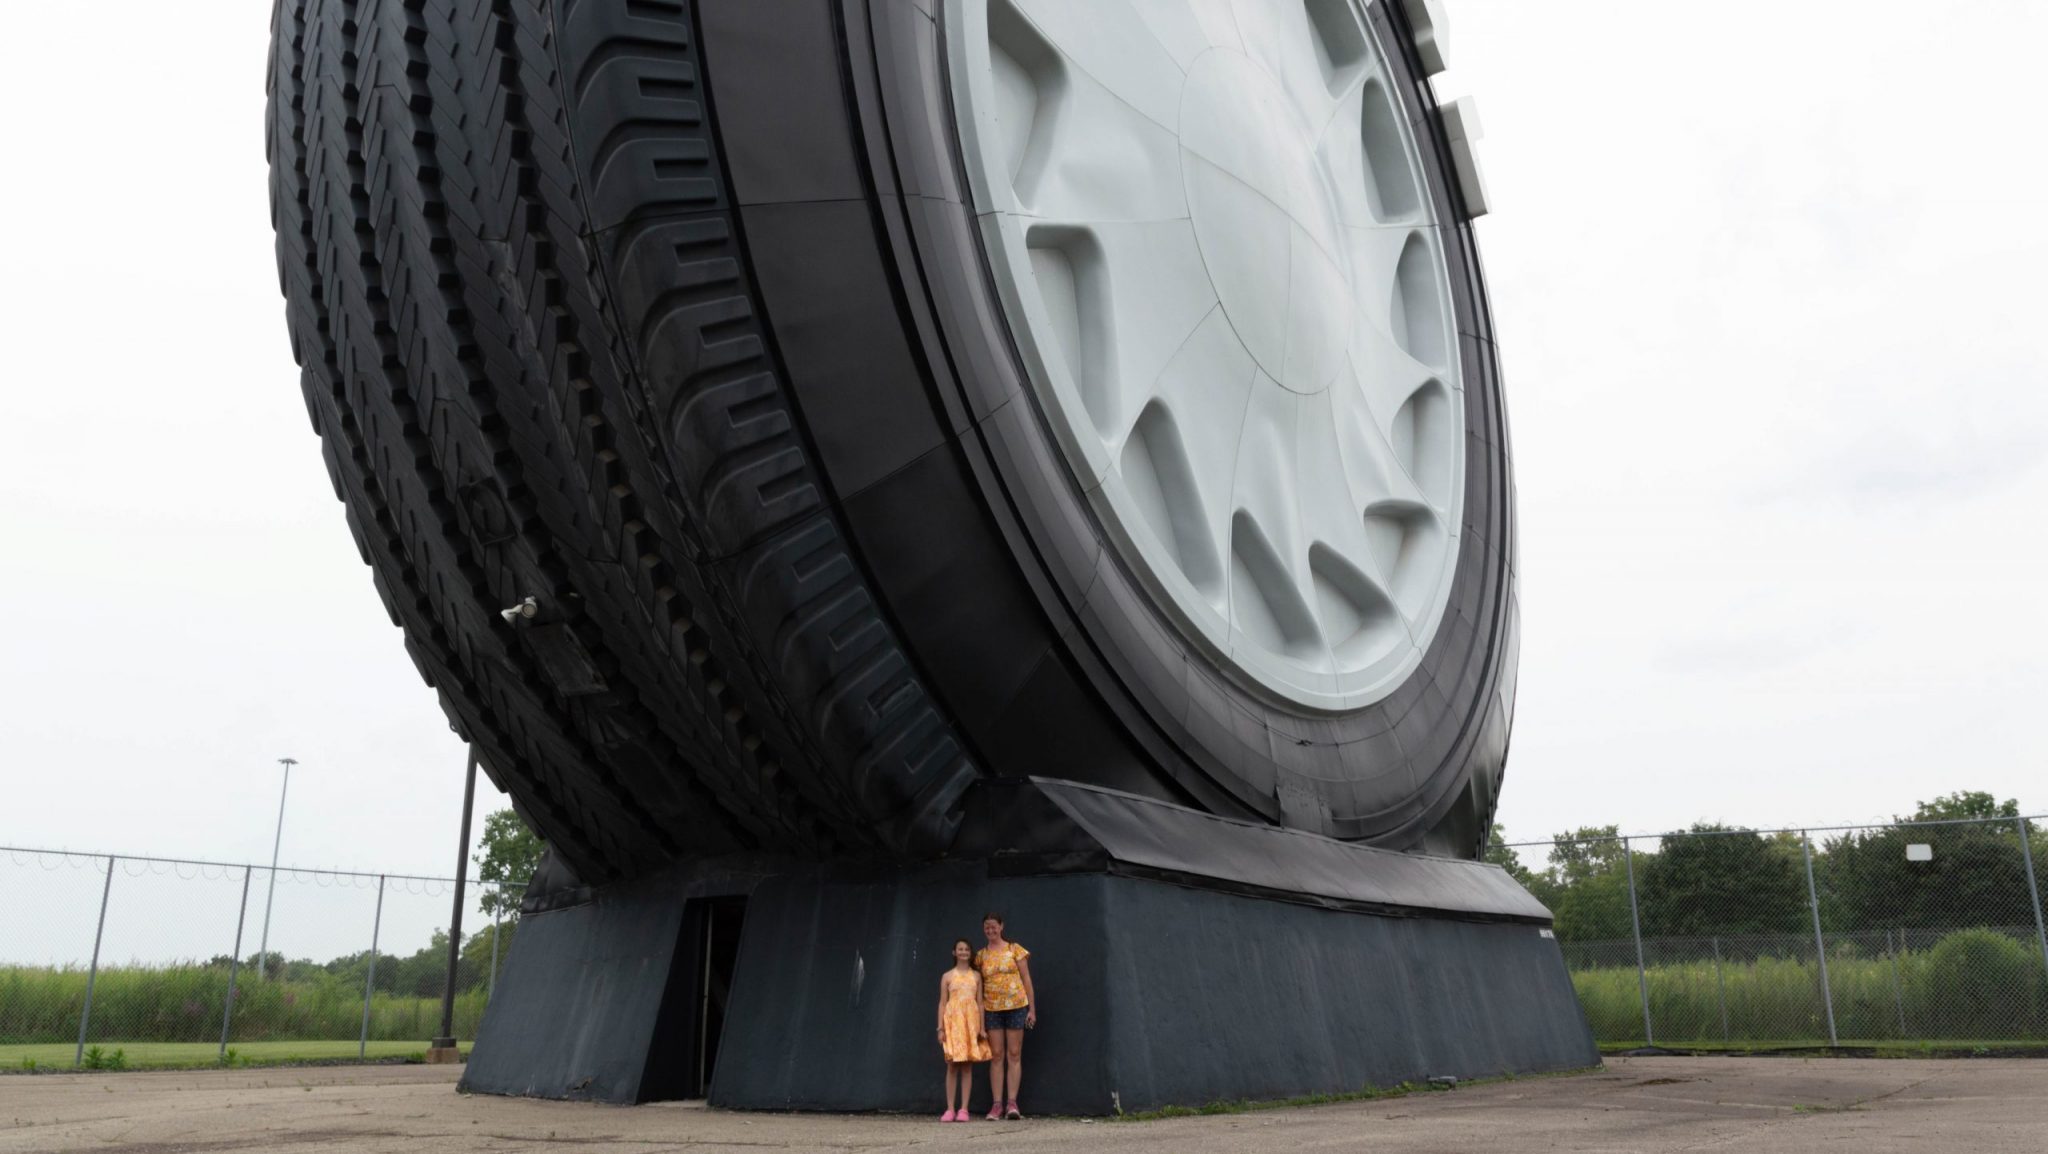 Valerie Brenner and her daughter Annika pose by the Giant Tire, dwarfed by its size.